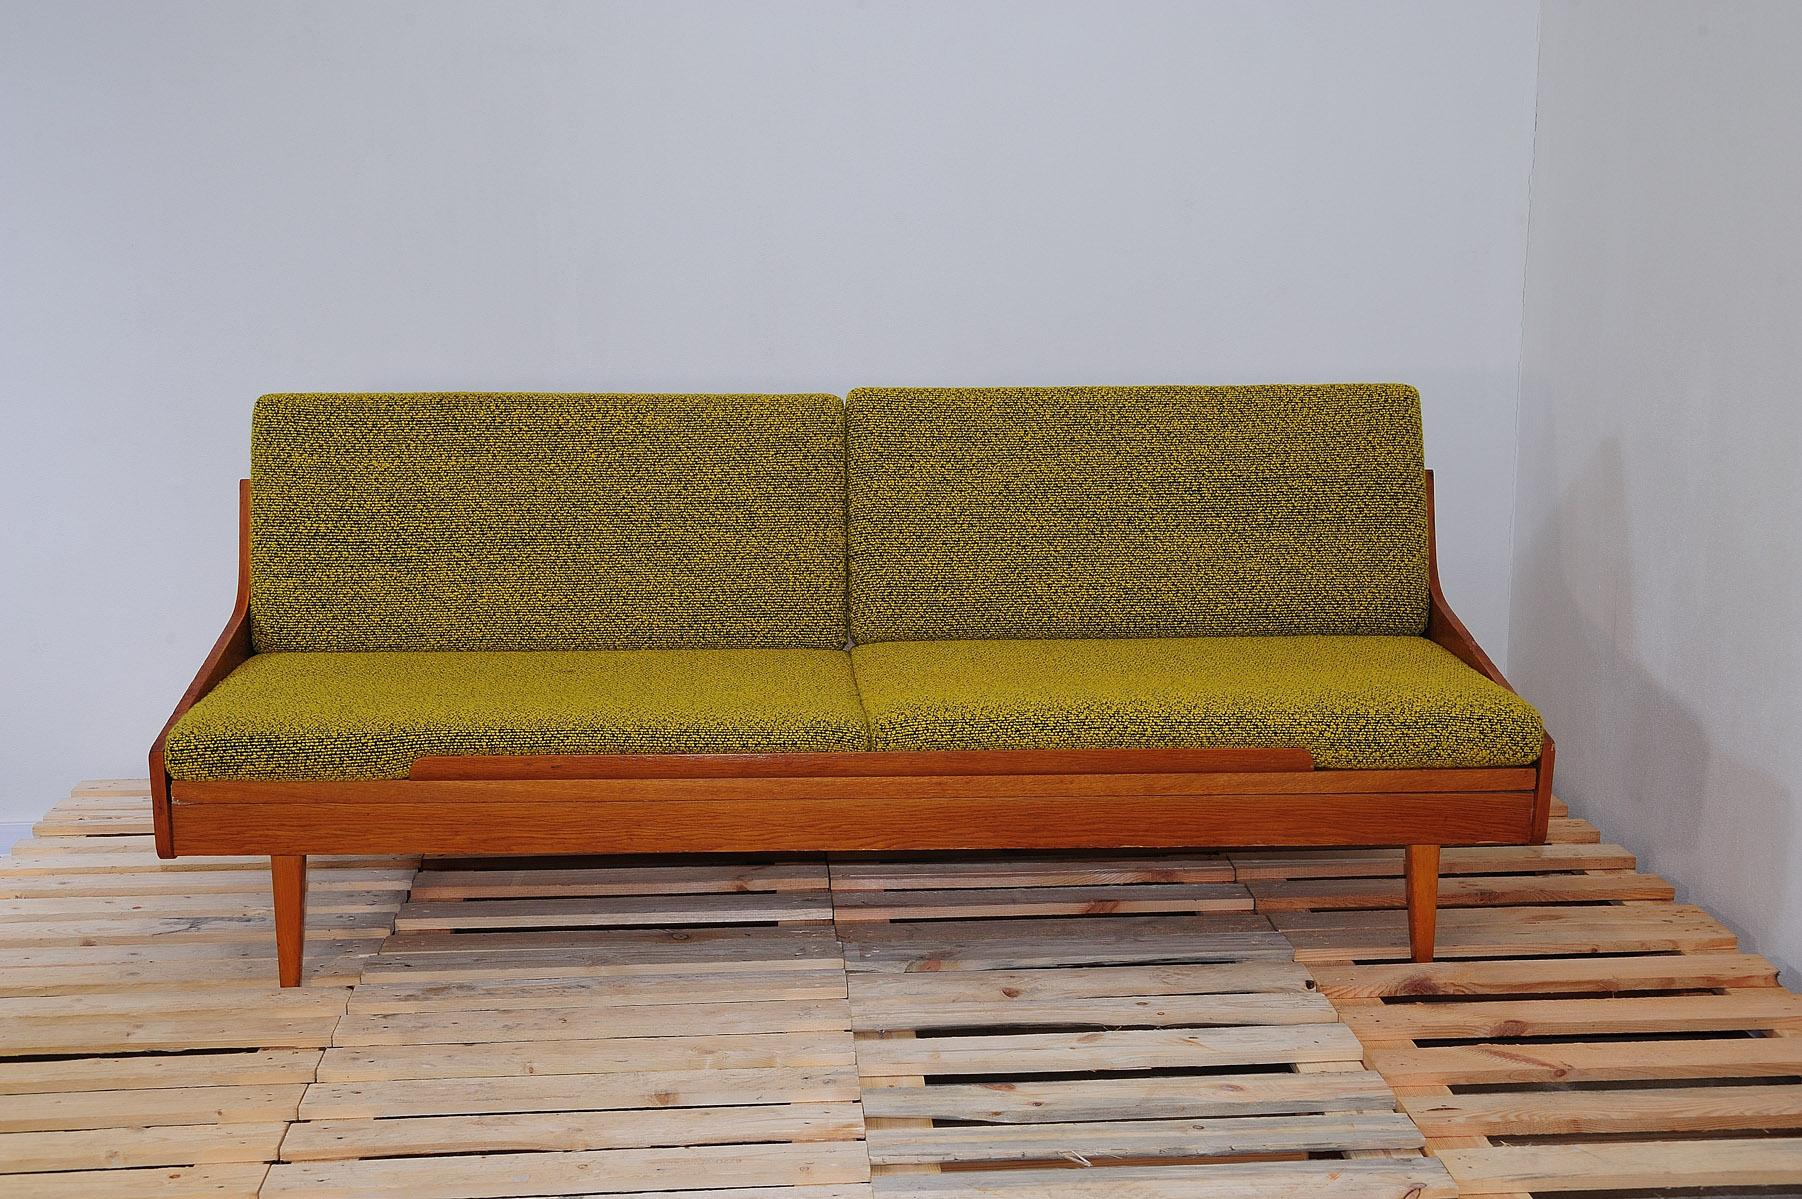 Mid century sofabed from Interiér Praha. It was made in the former Czechoslovakia in the 1960´s. This sofa has a wooden structure that is veneered in beech wood. The mattresses are rather soft.

The sofa is in very good Vintage condition, showing